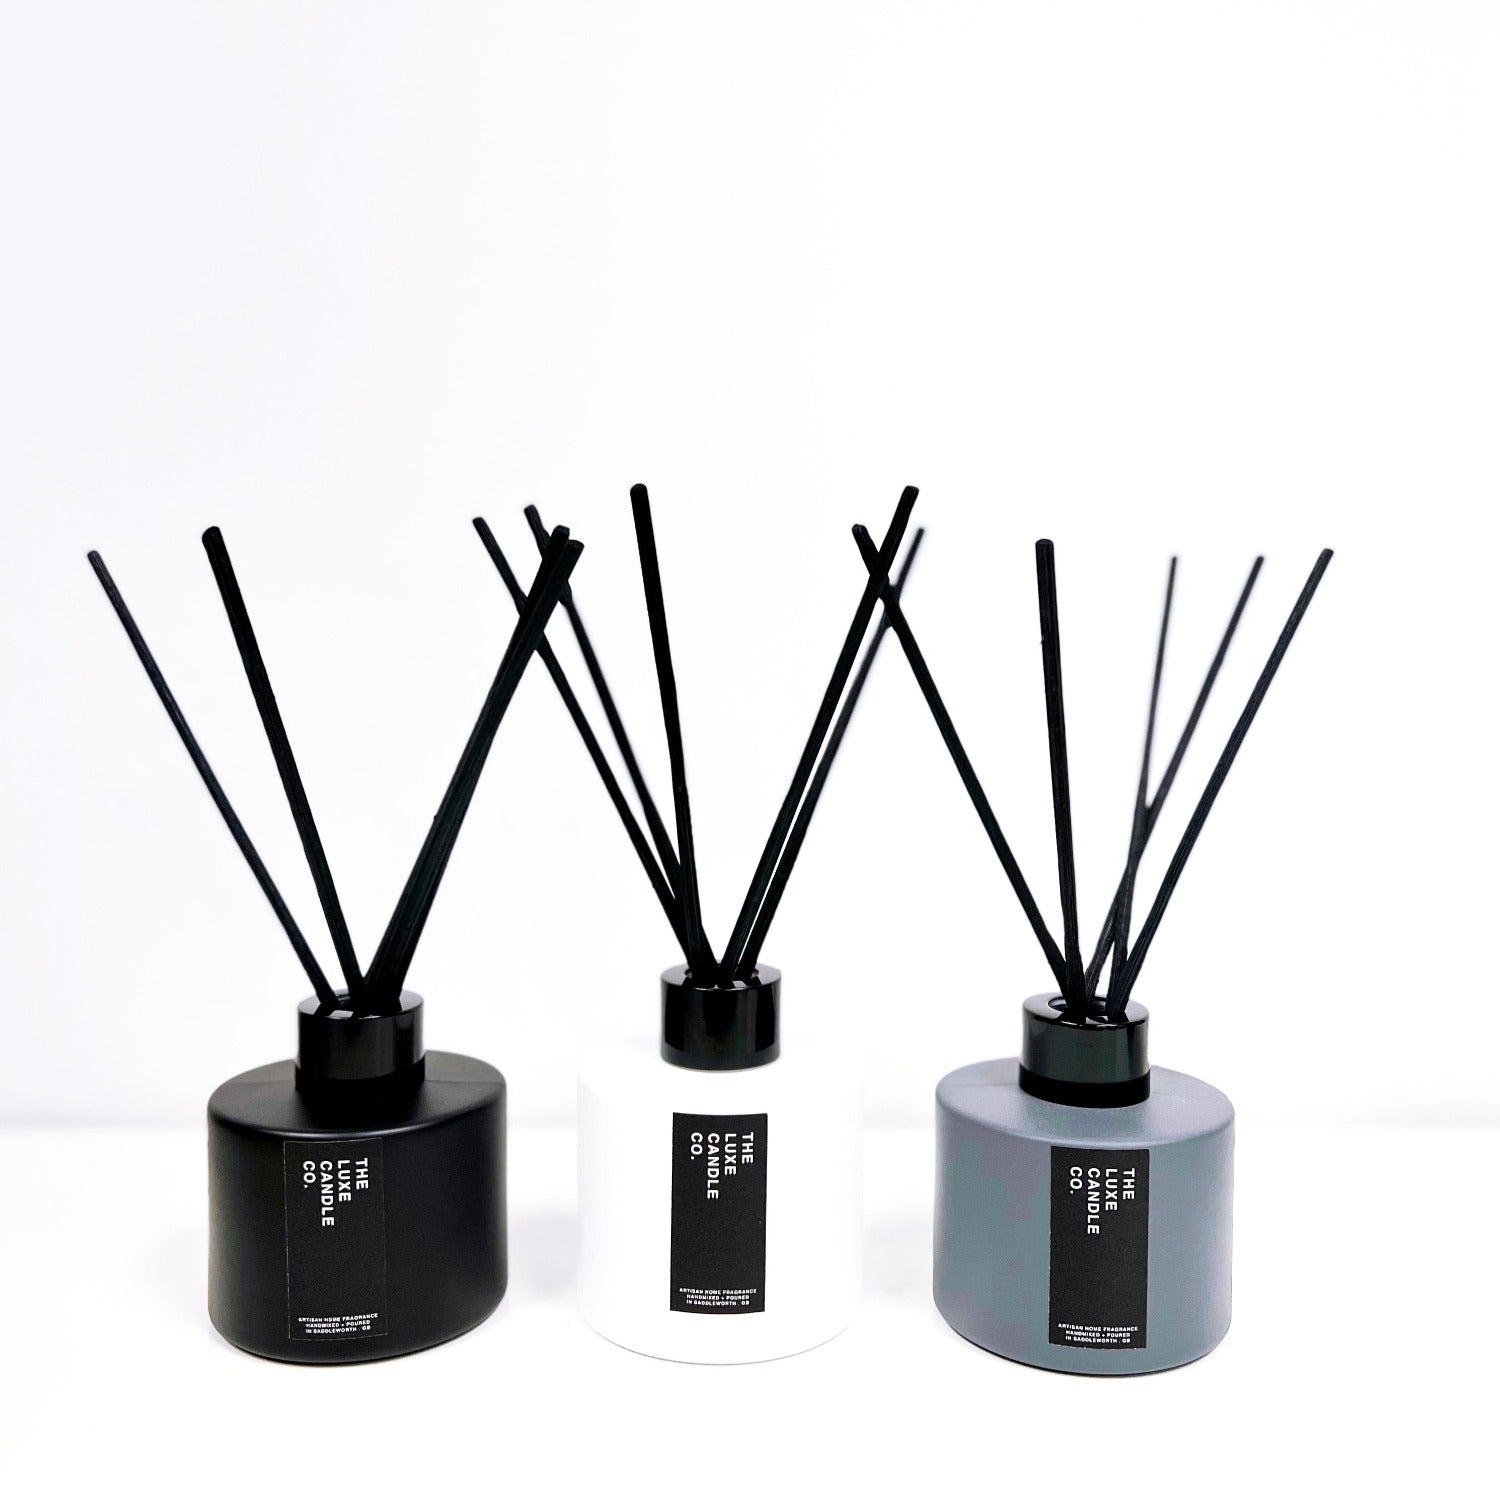 palo santo reed diffuser gift set with white reed diffuser | gift ideas  UK